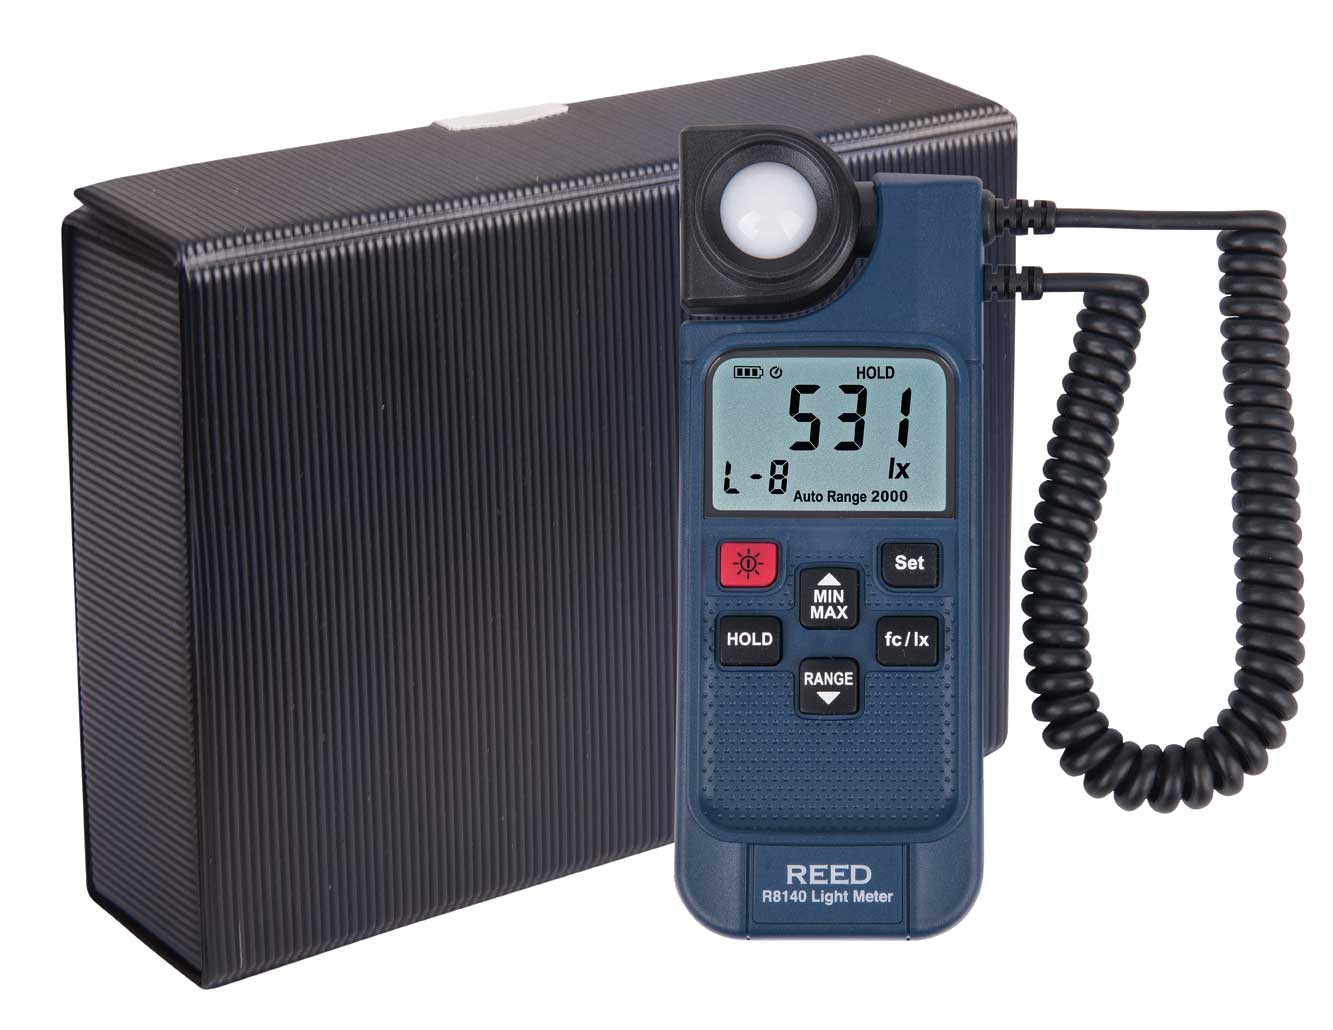 Reed R8140 Led Light Meter Included